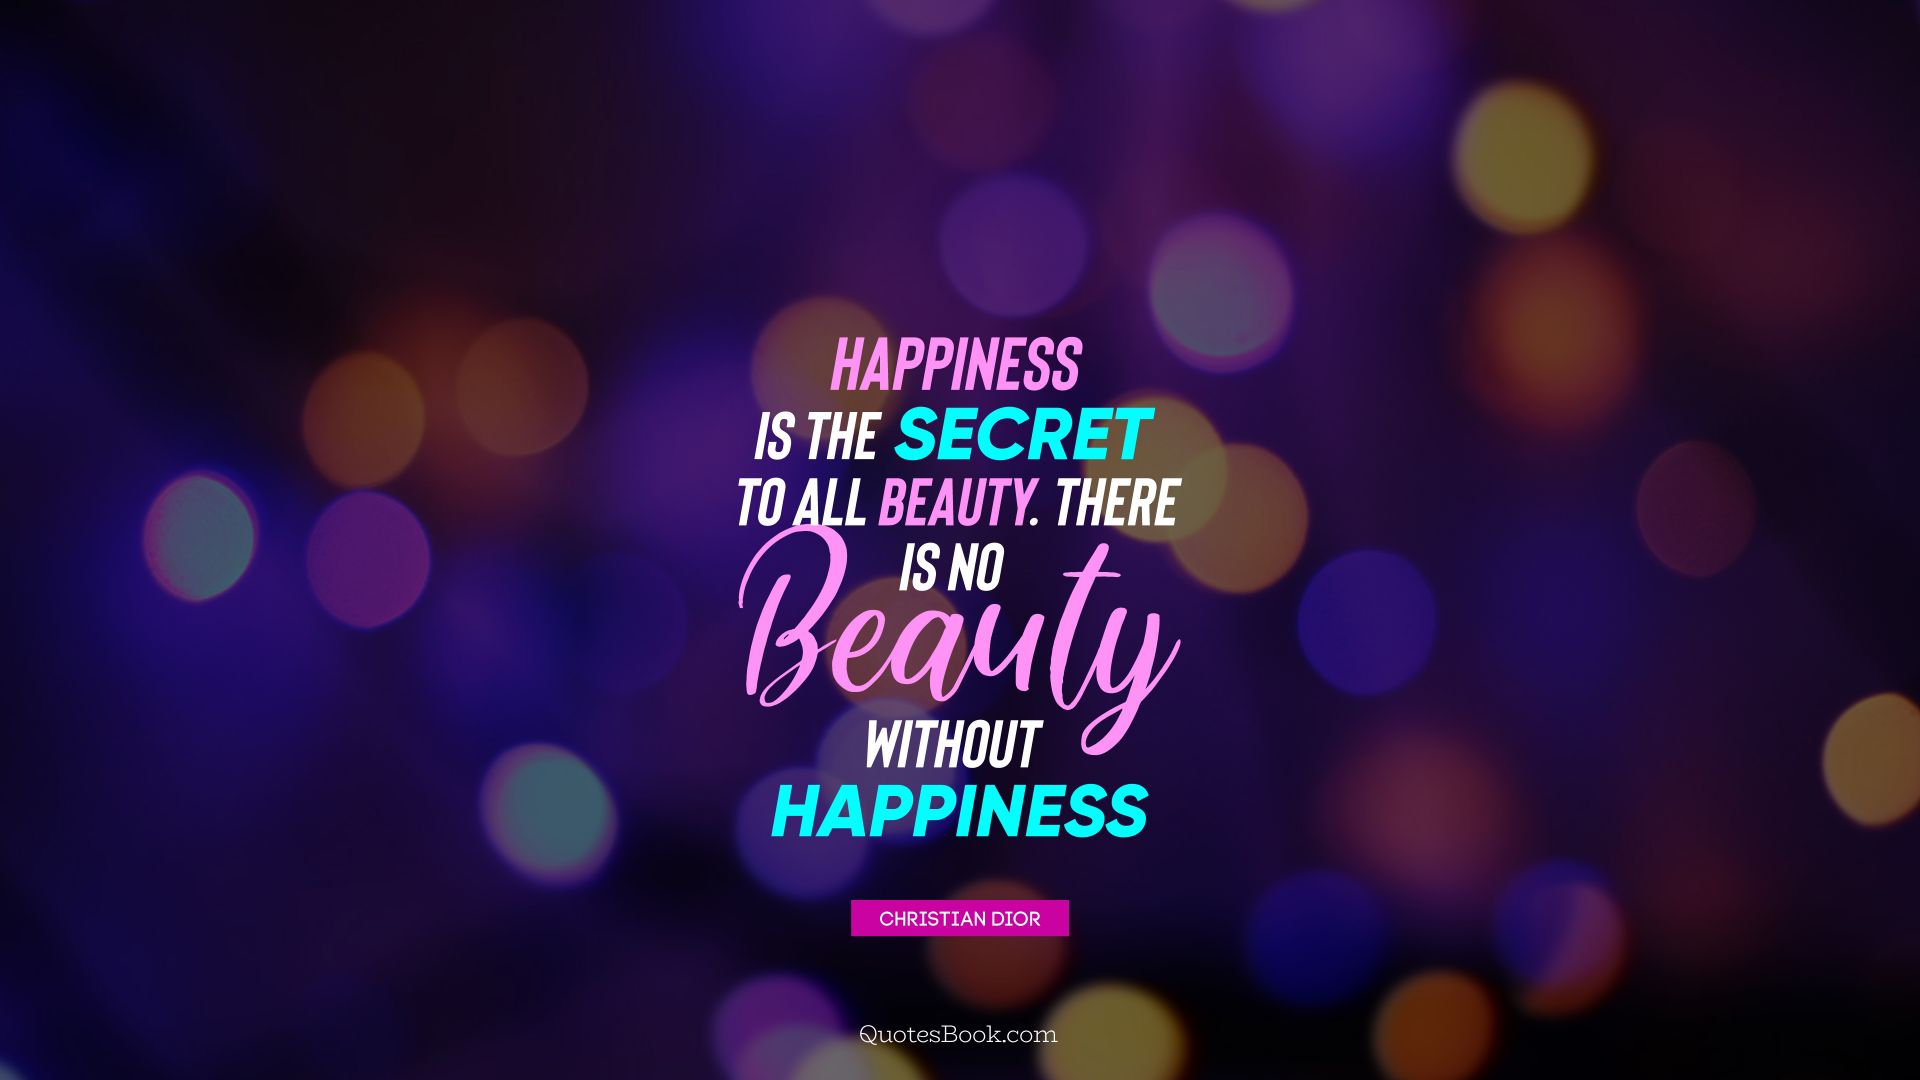 Happiness is the secret to all beauty. There is no beauty without happiness. - Quote by Christian Dior